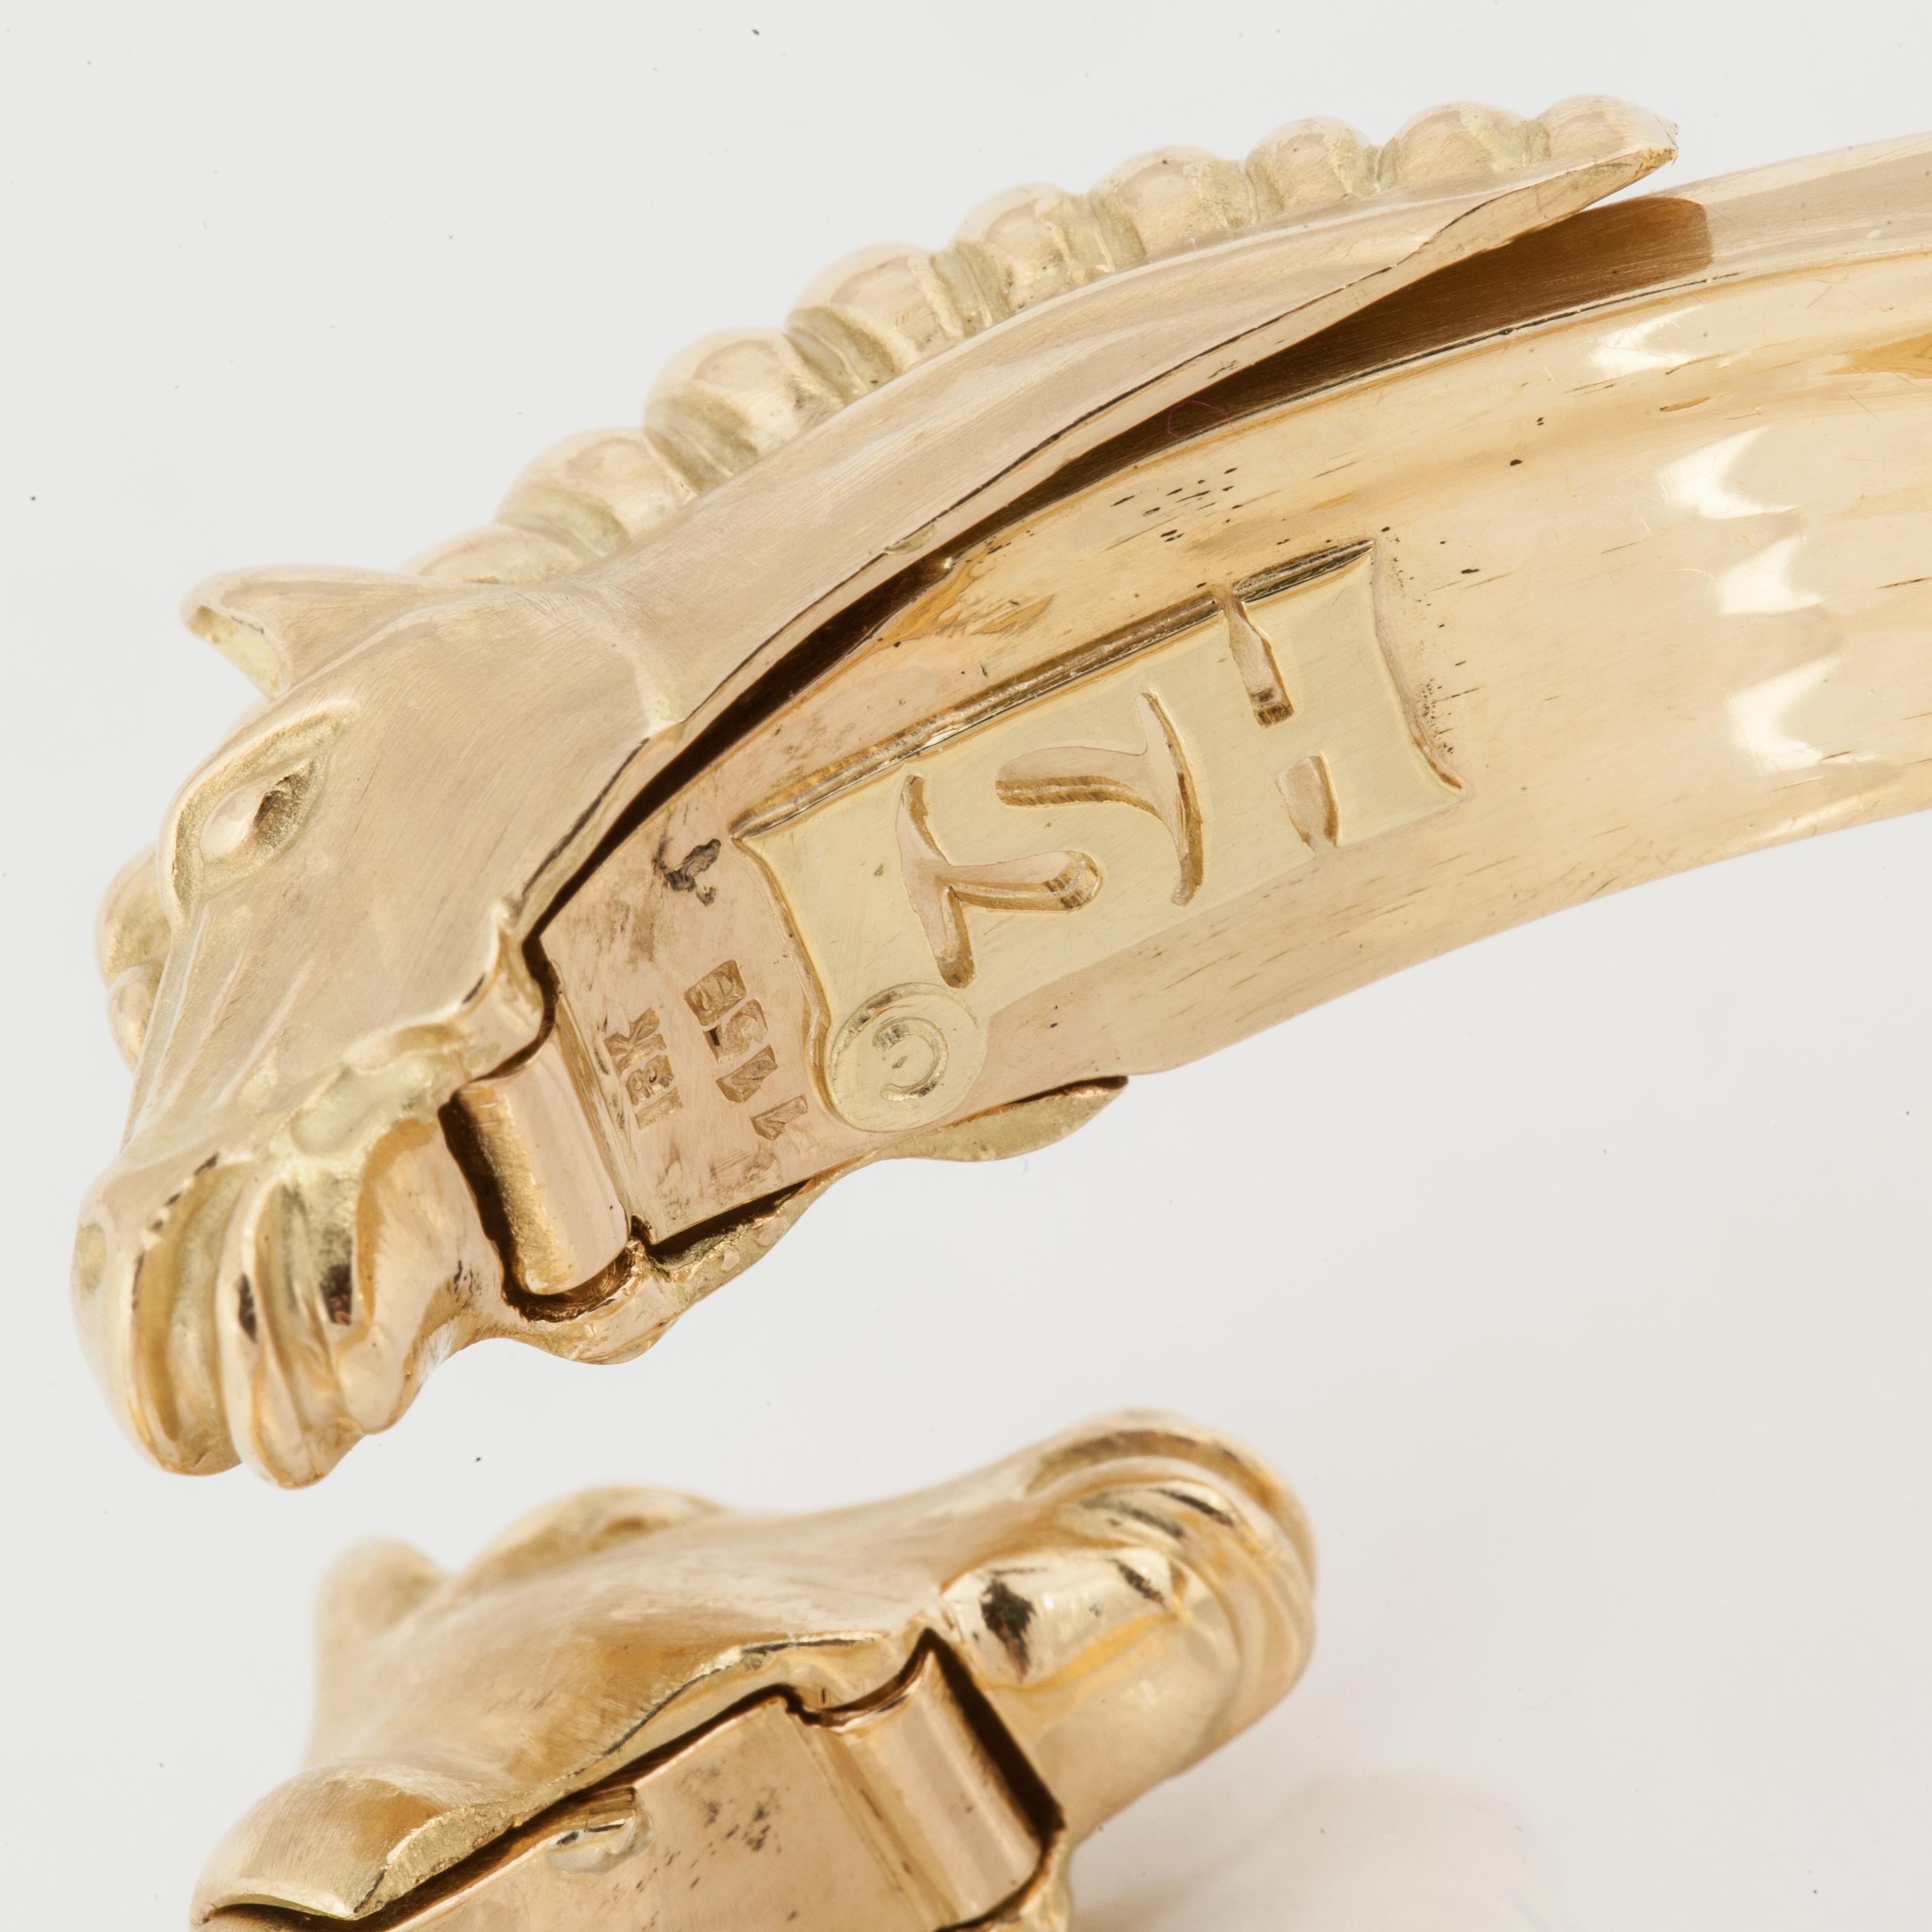 A princess-cut diamond tennis bracelet that includes a horse head jacket.  Bracelets are 14K and 18K yellow gold.  There are 66 princess-cut diamonds that total 7.20 carats; H-I color and VS-SI clarity.  The horse heads are hinged and lift up to